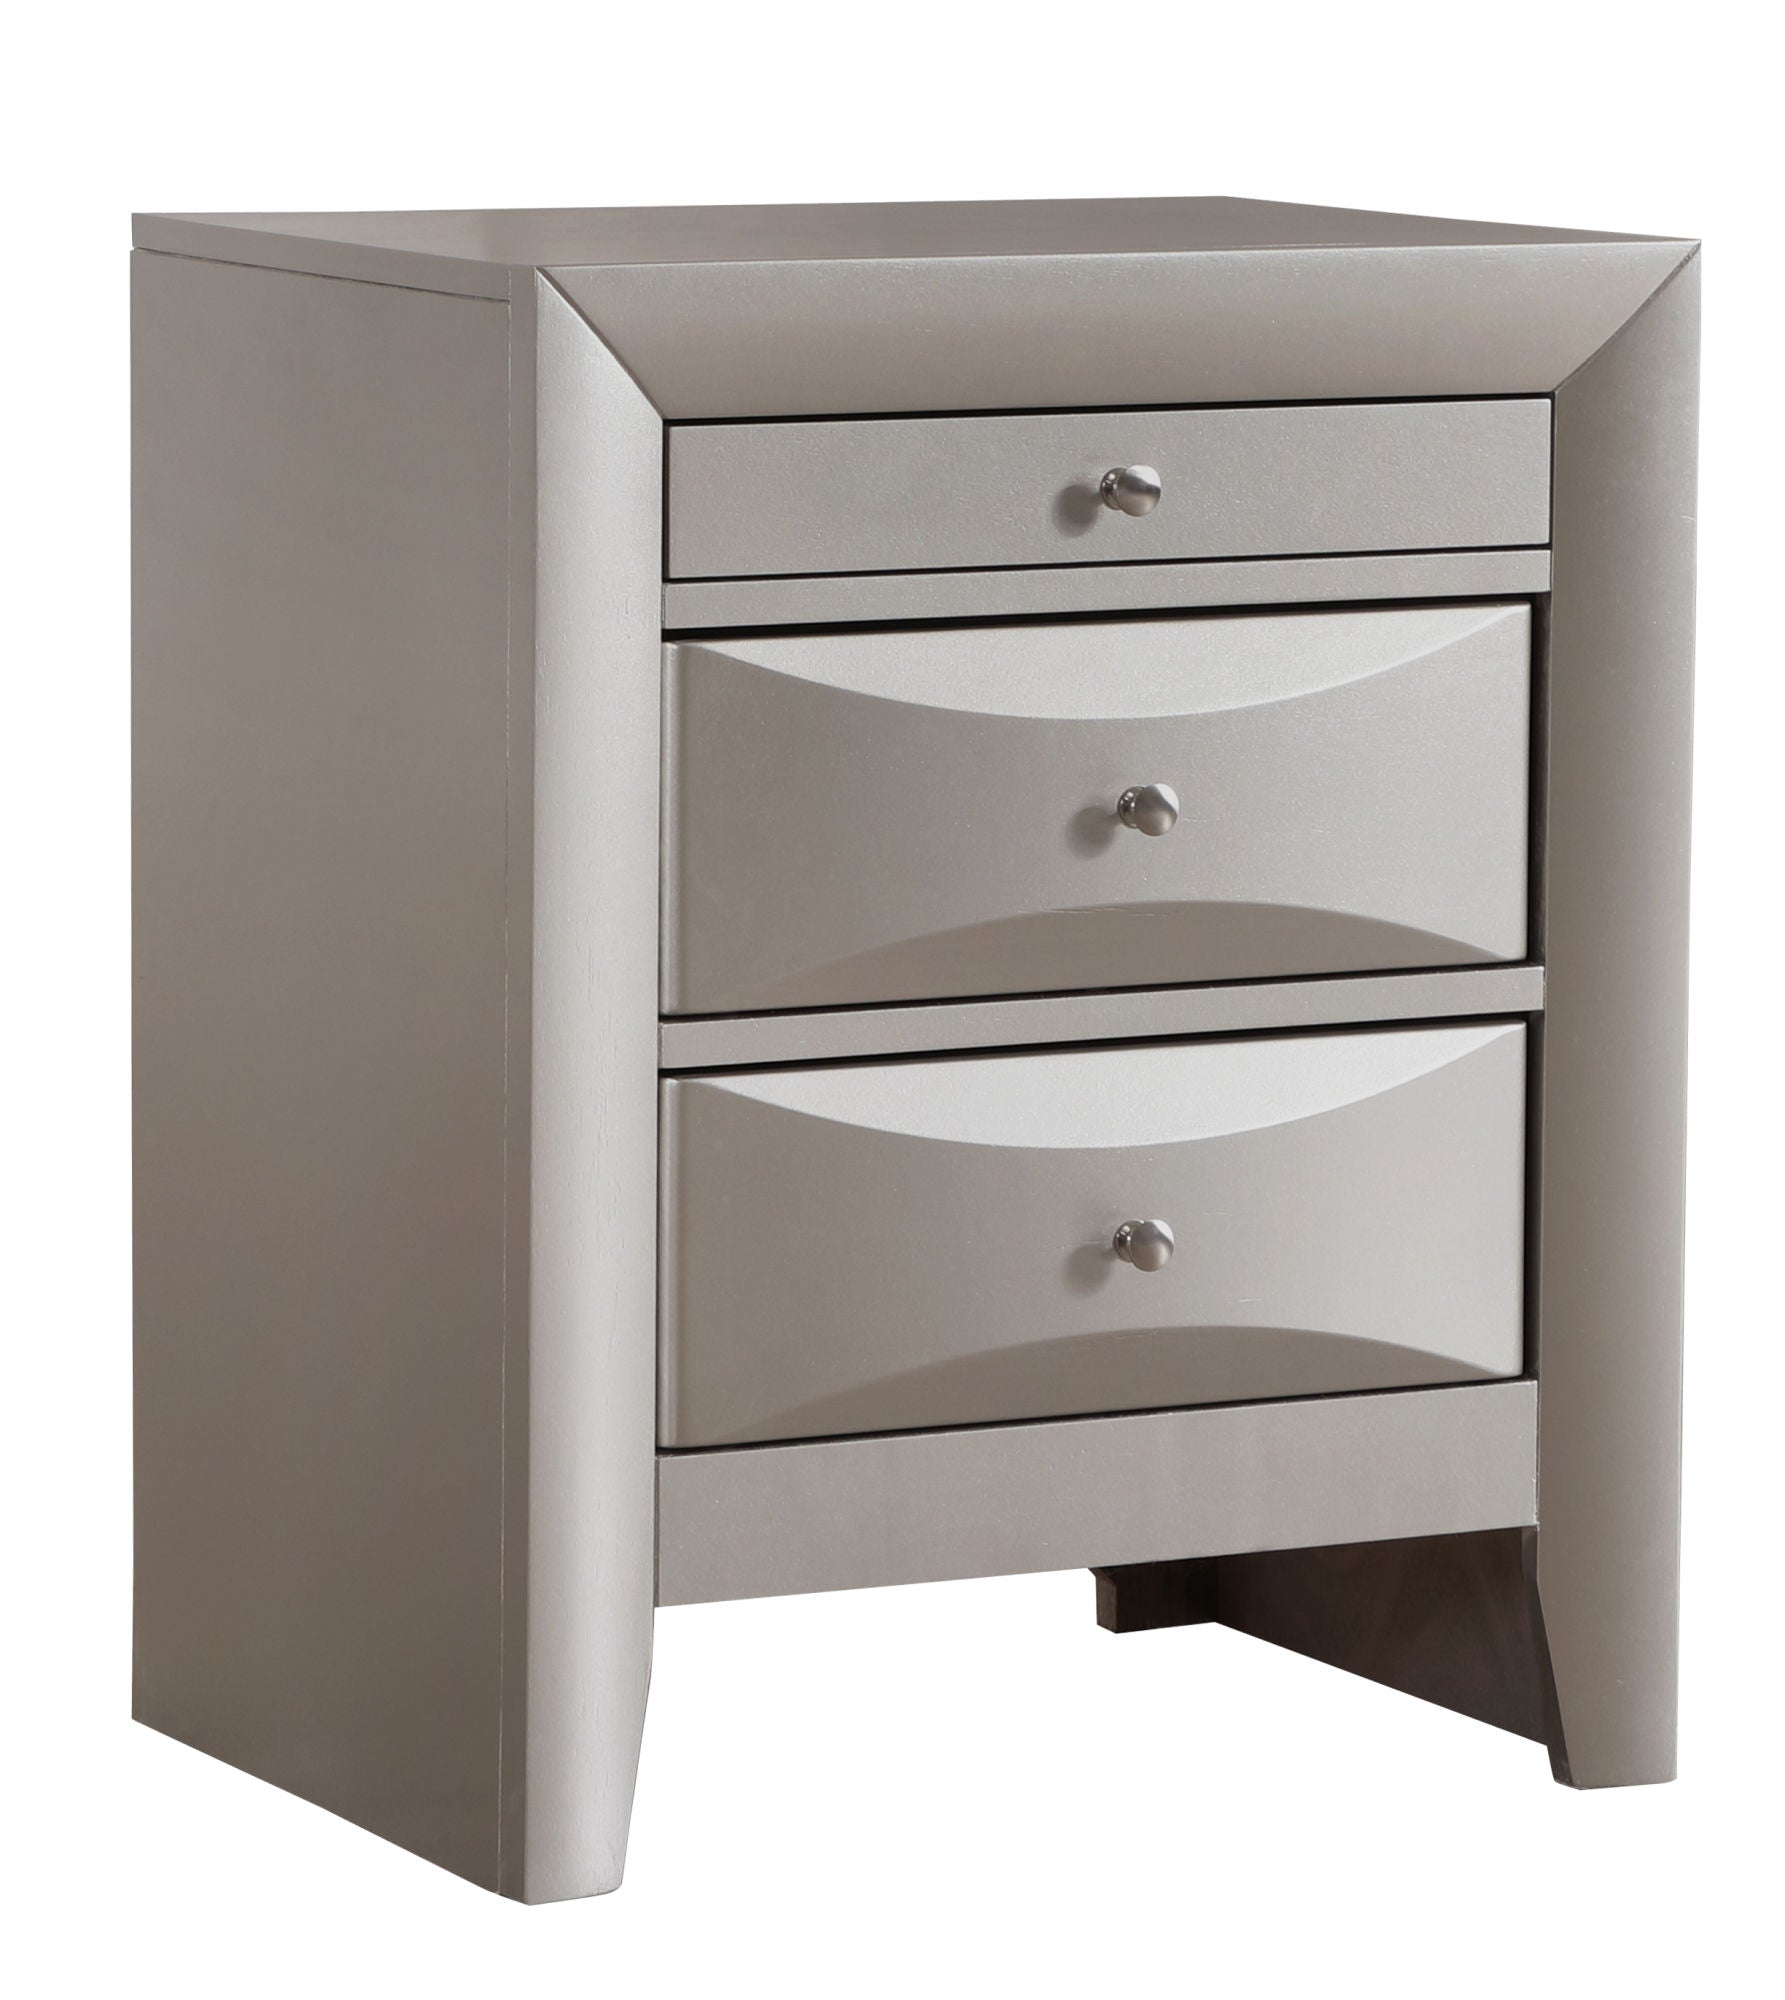 Glory Furniture Marilla G1503-N Nightstand , Silver Champagne Home Decor by Design